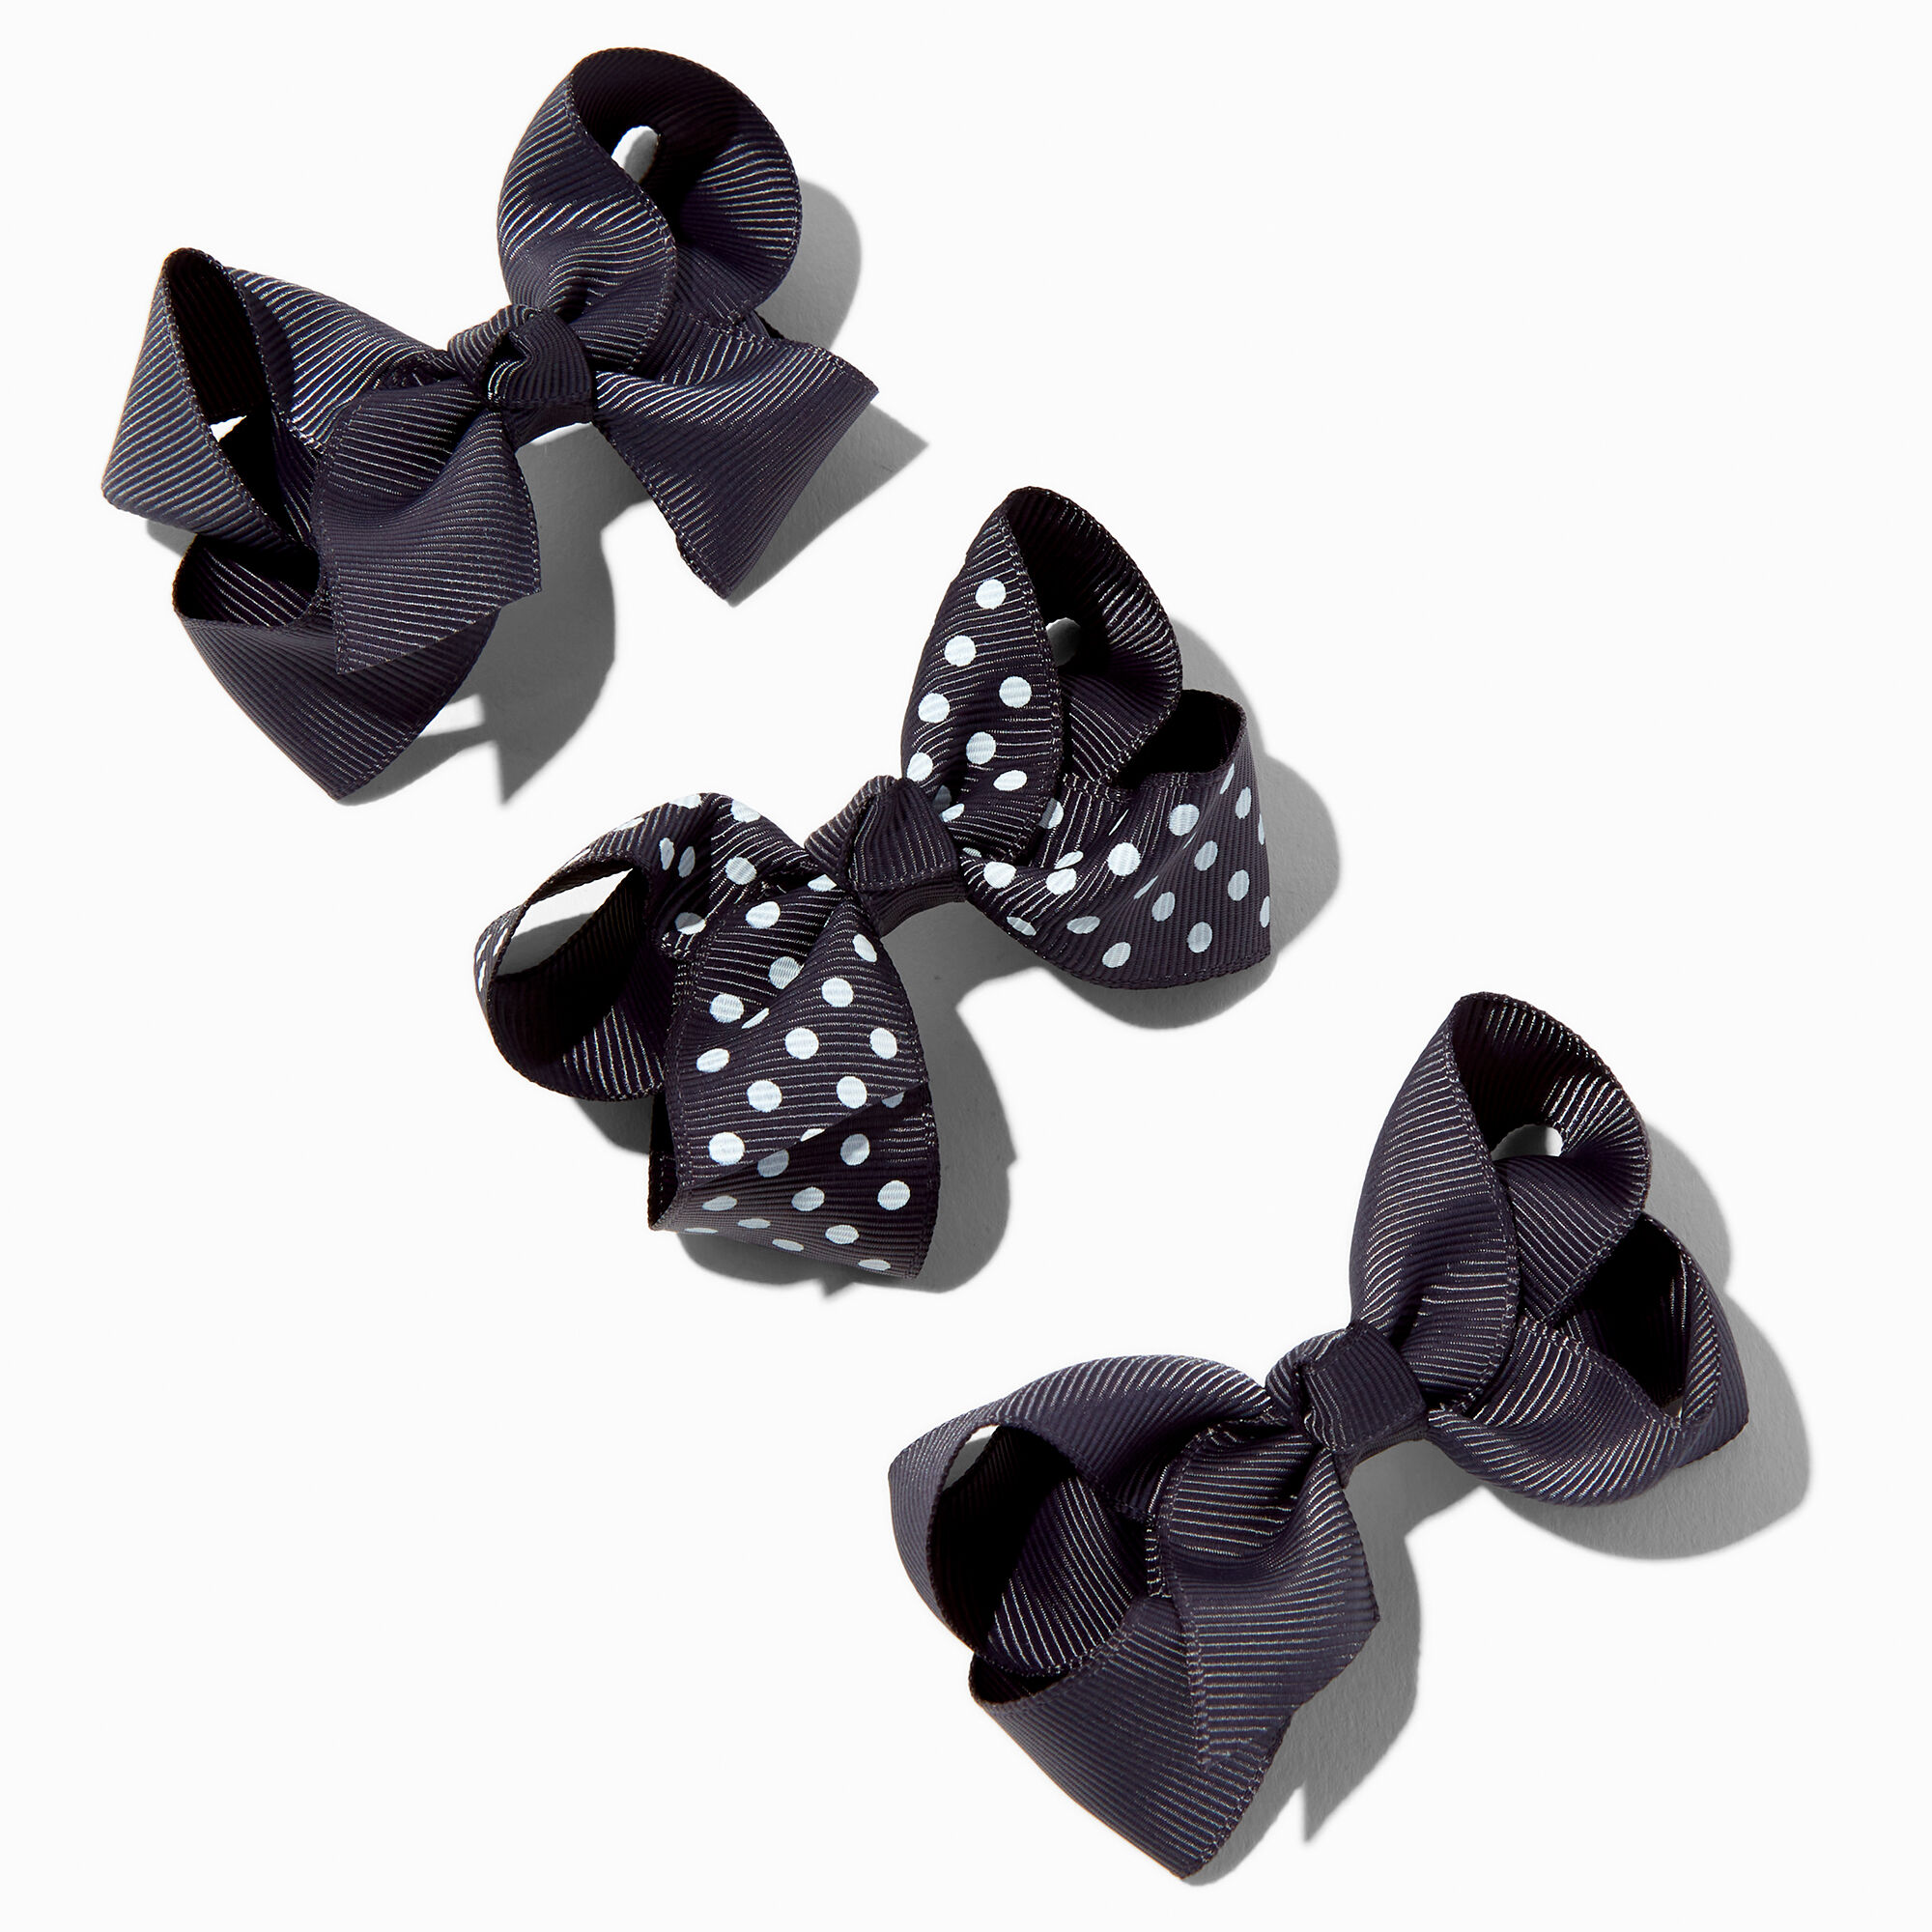 View Claires Club Loopy Bow Hair Clips 3 Pack Black information